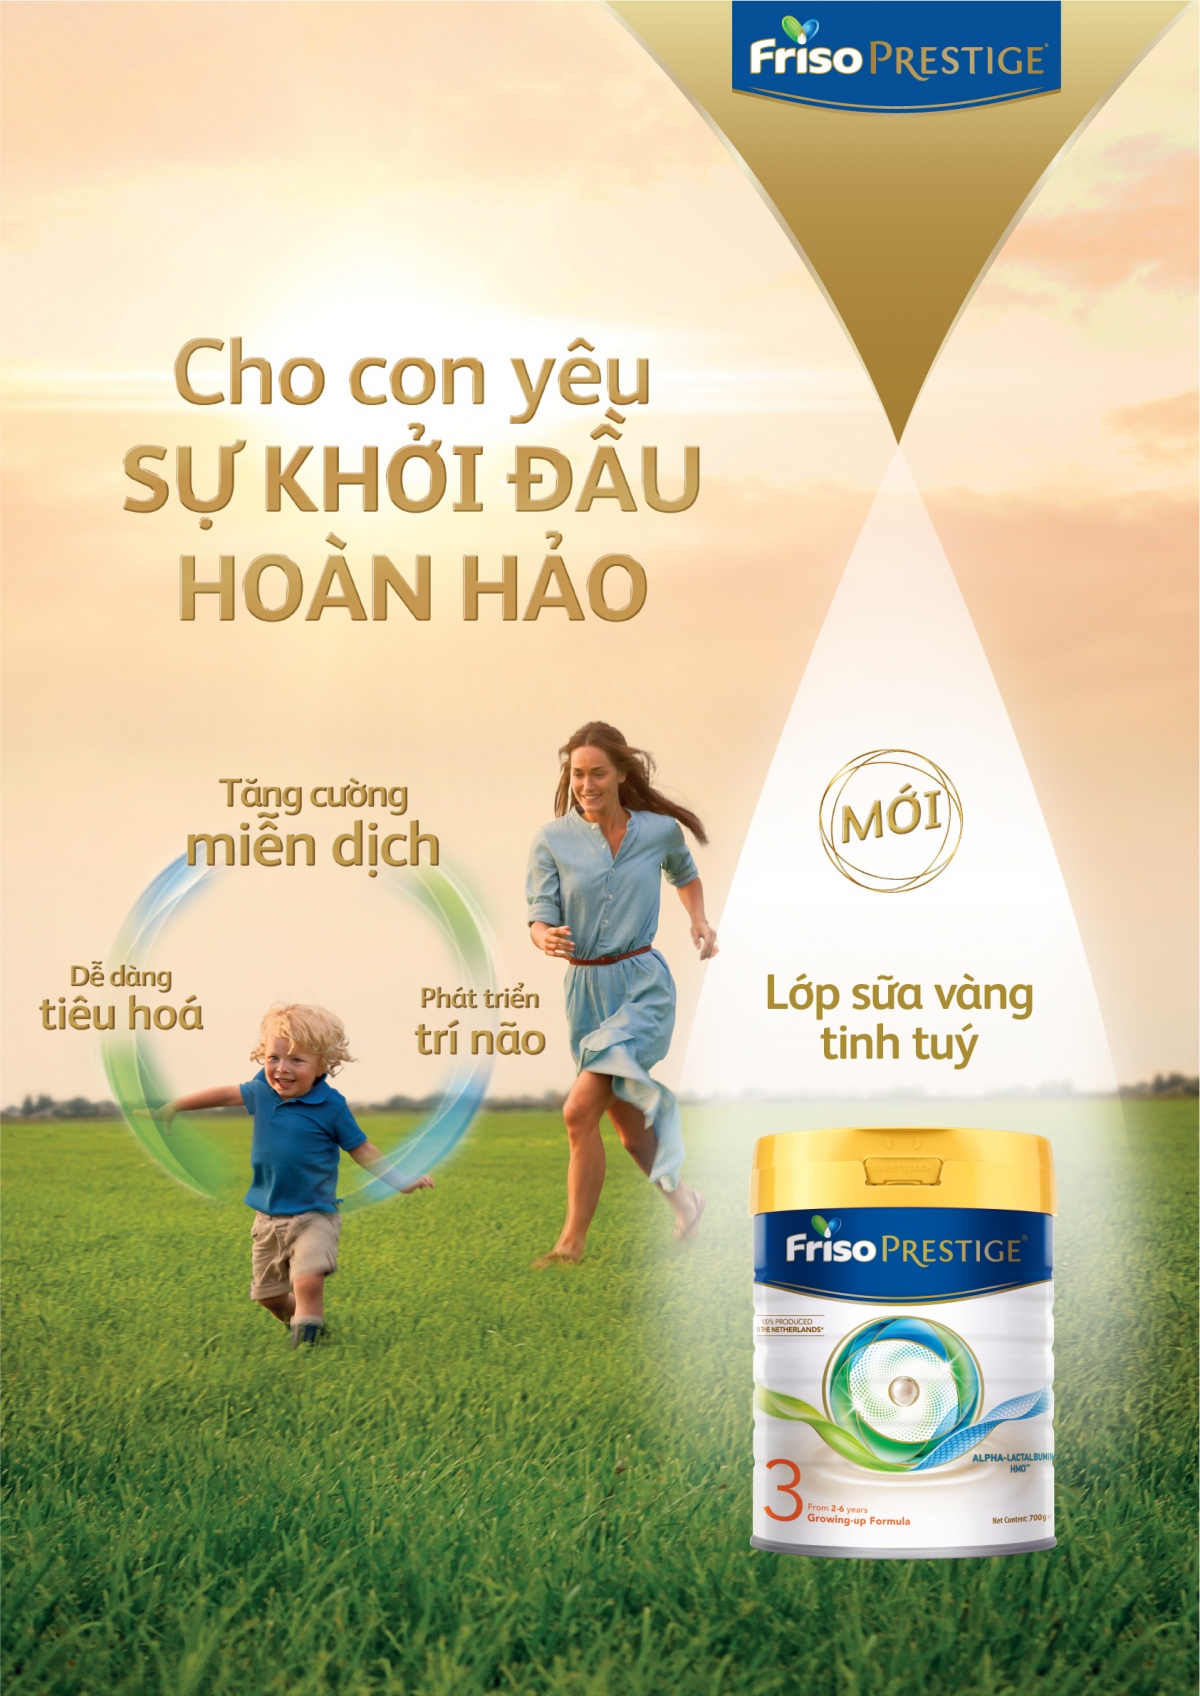 friso prestige voi cong thuc dinh duong lop sua vang tang cuong mien dich hinh anh 6